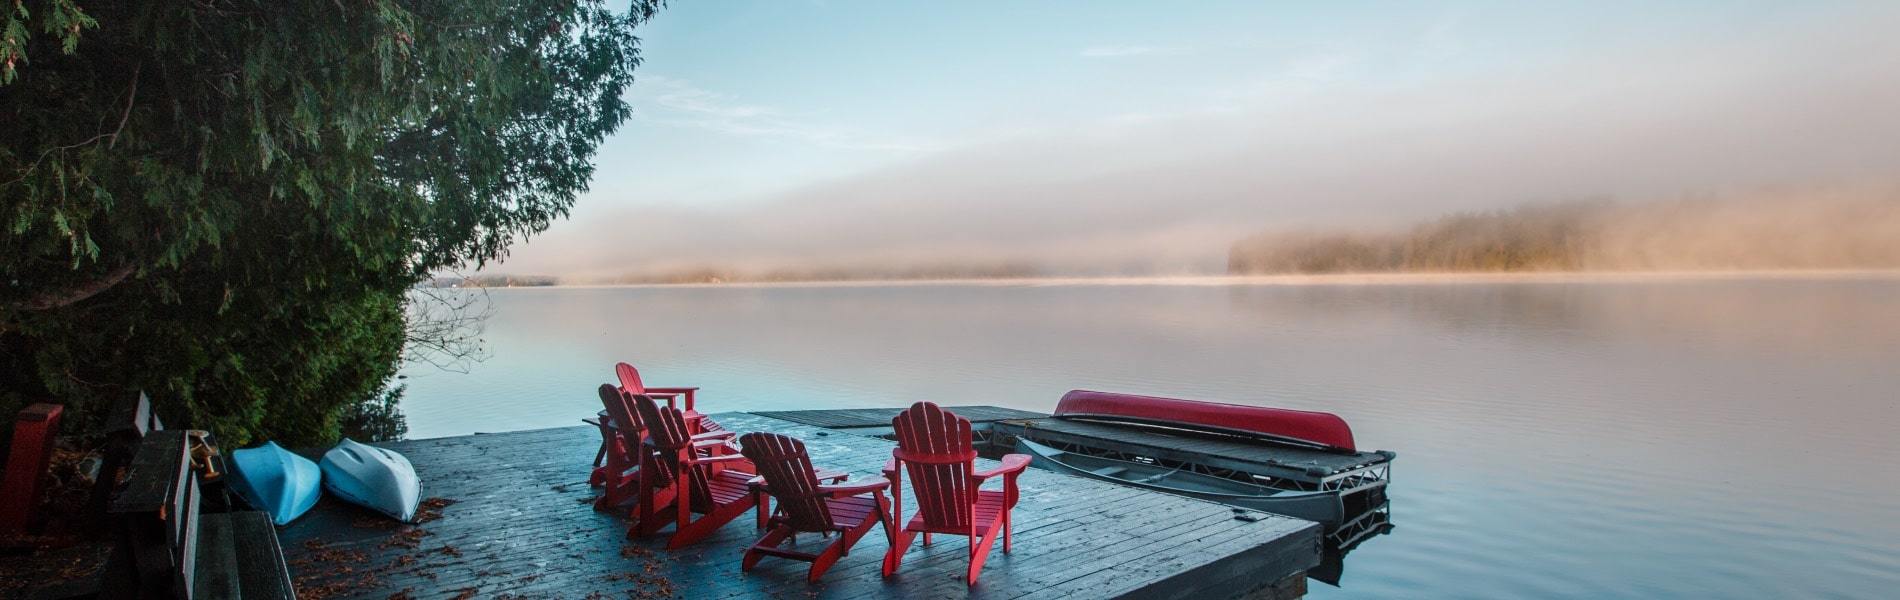 View overlooking Ontario lakes with dock and Muskoka chairs